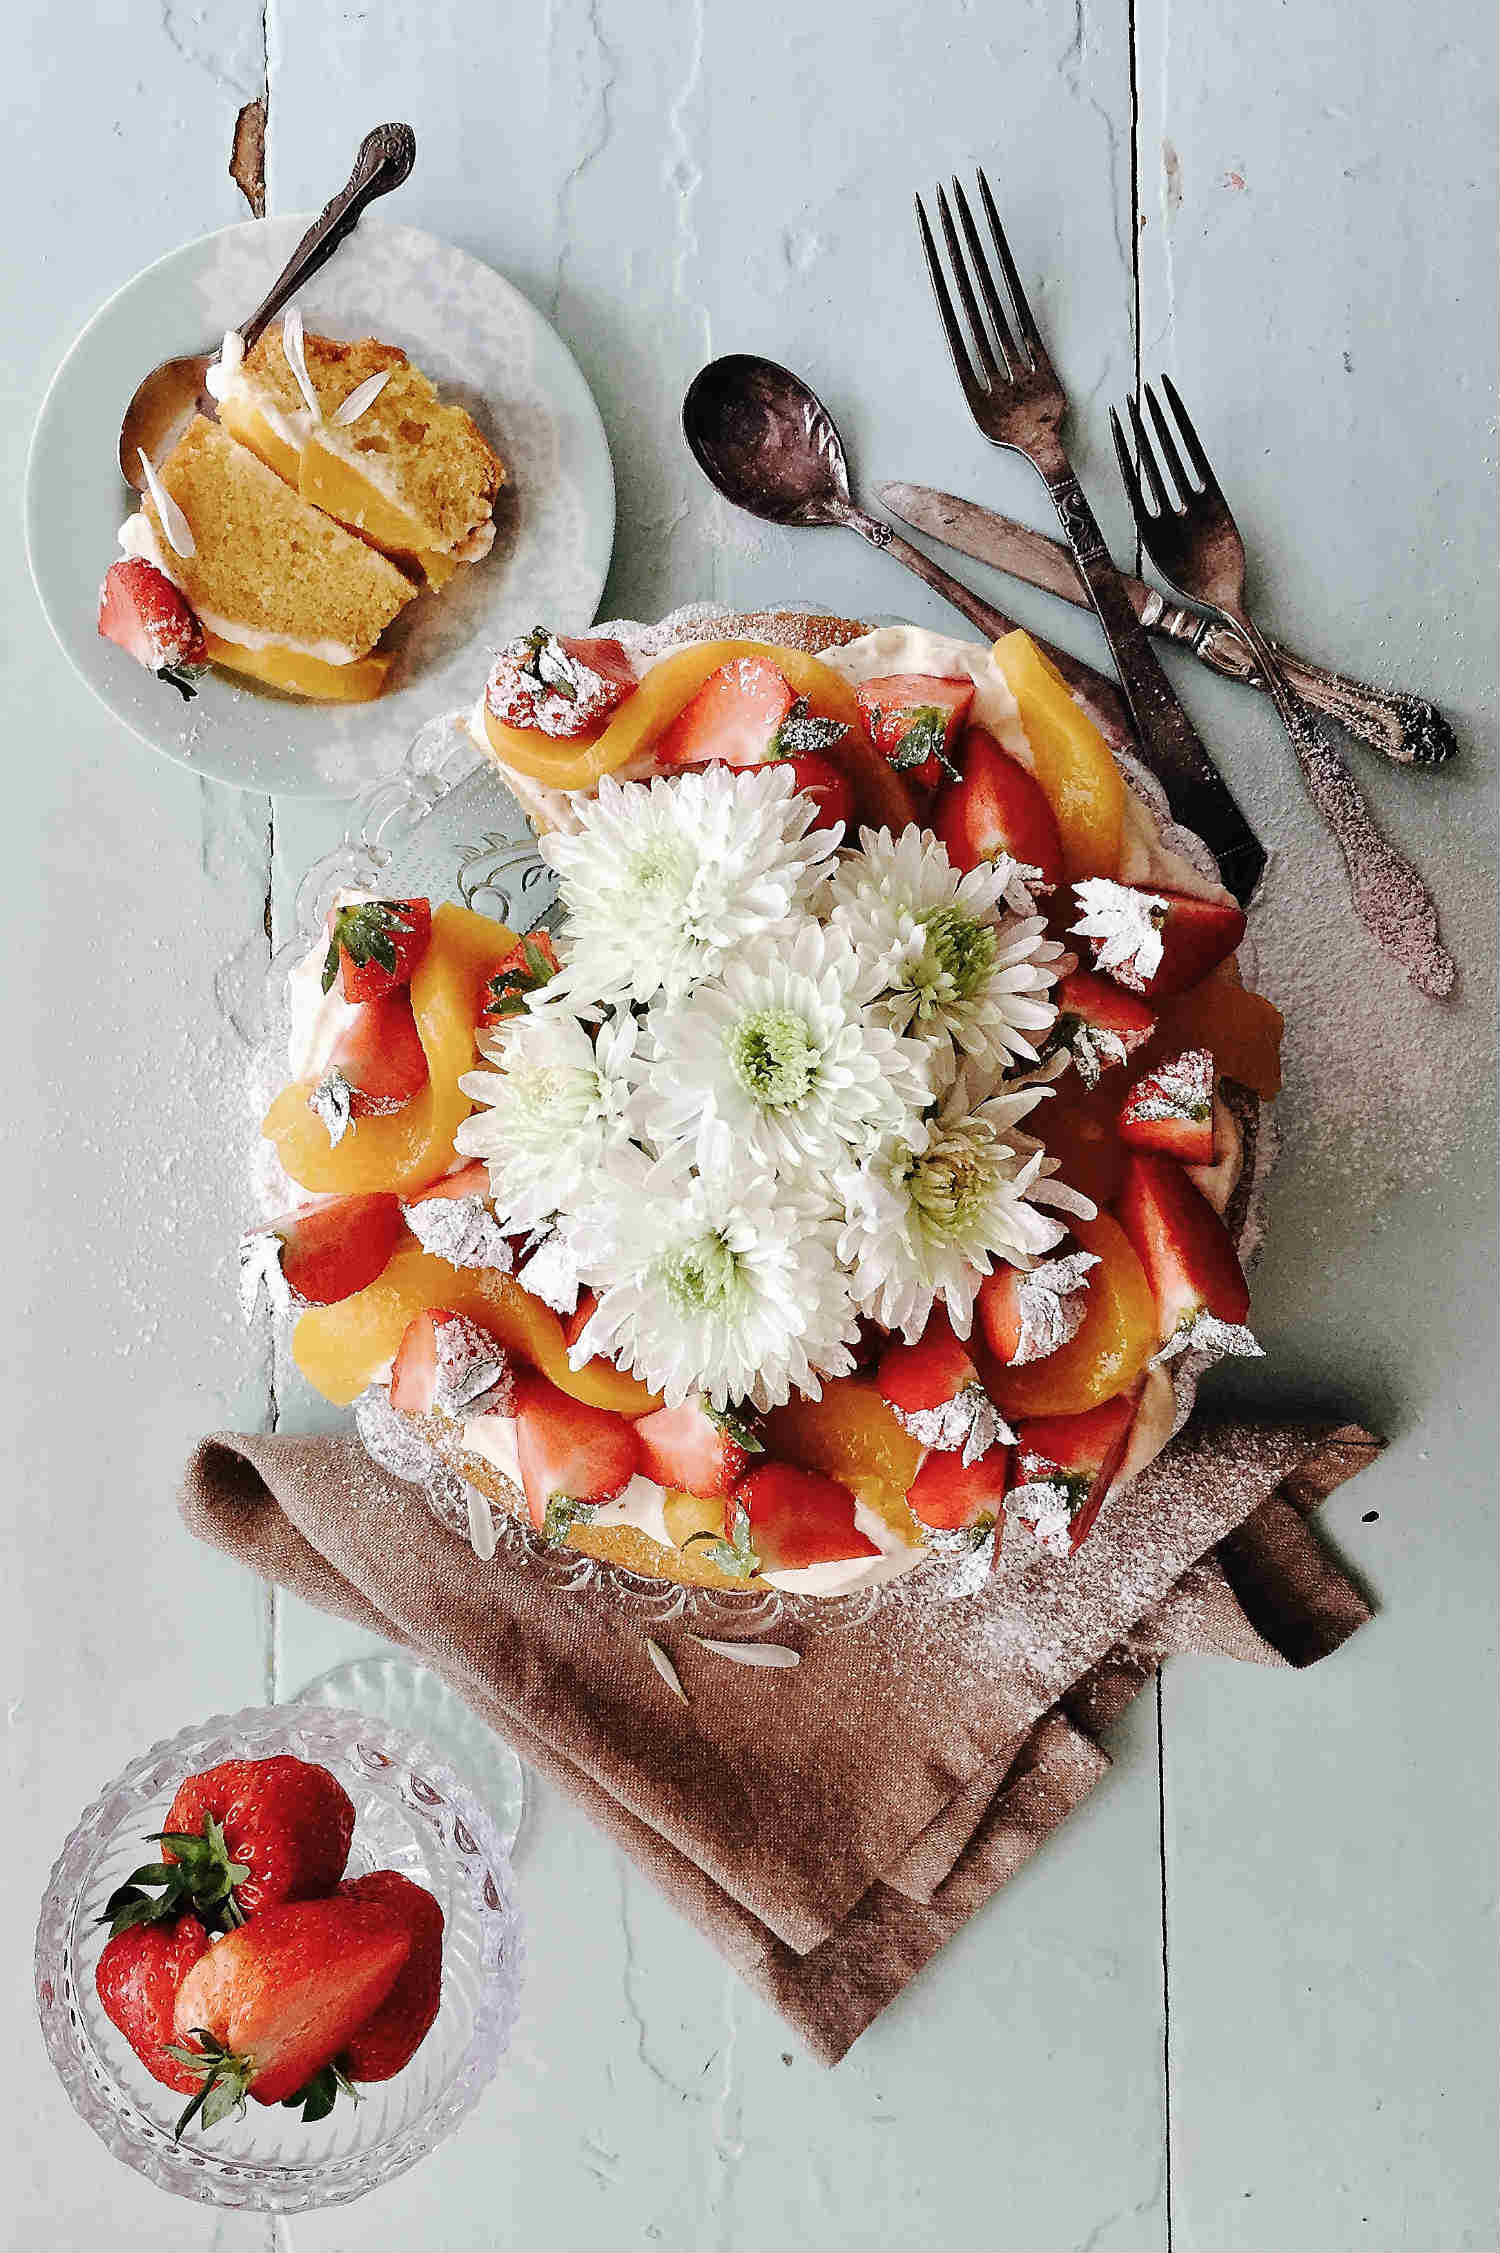 Midsummer Cake with Fruits & Cream Cheese Filling